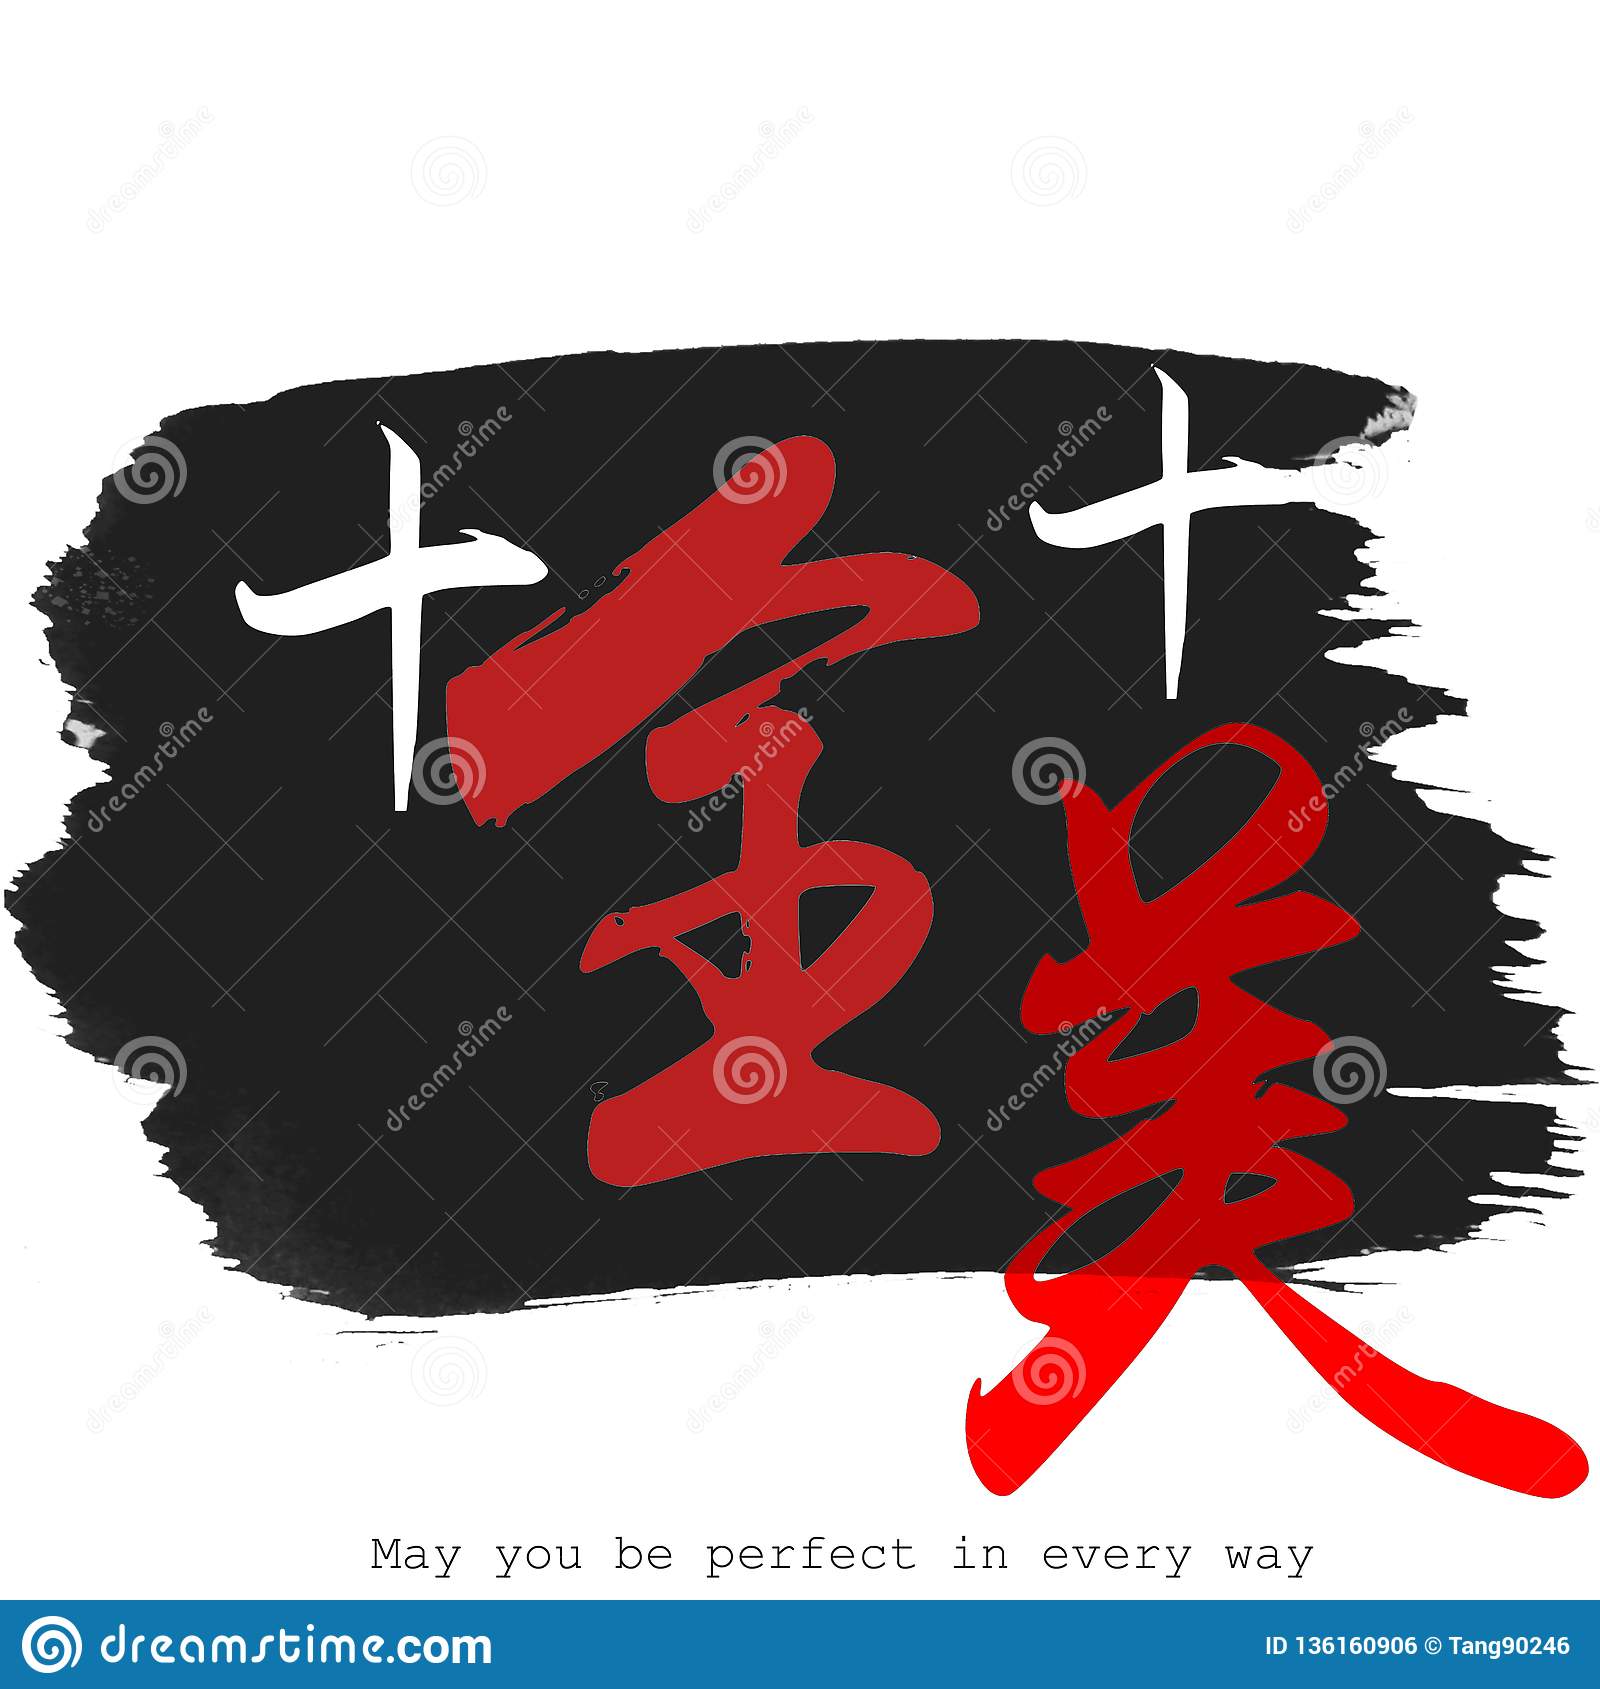 chinese-calligraphy-word-may-you-be-perfect-every-way-chinese-calligraphy-word-may-you-be-perfect-every-way-white-136160906